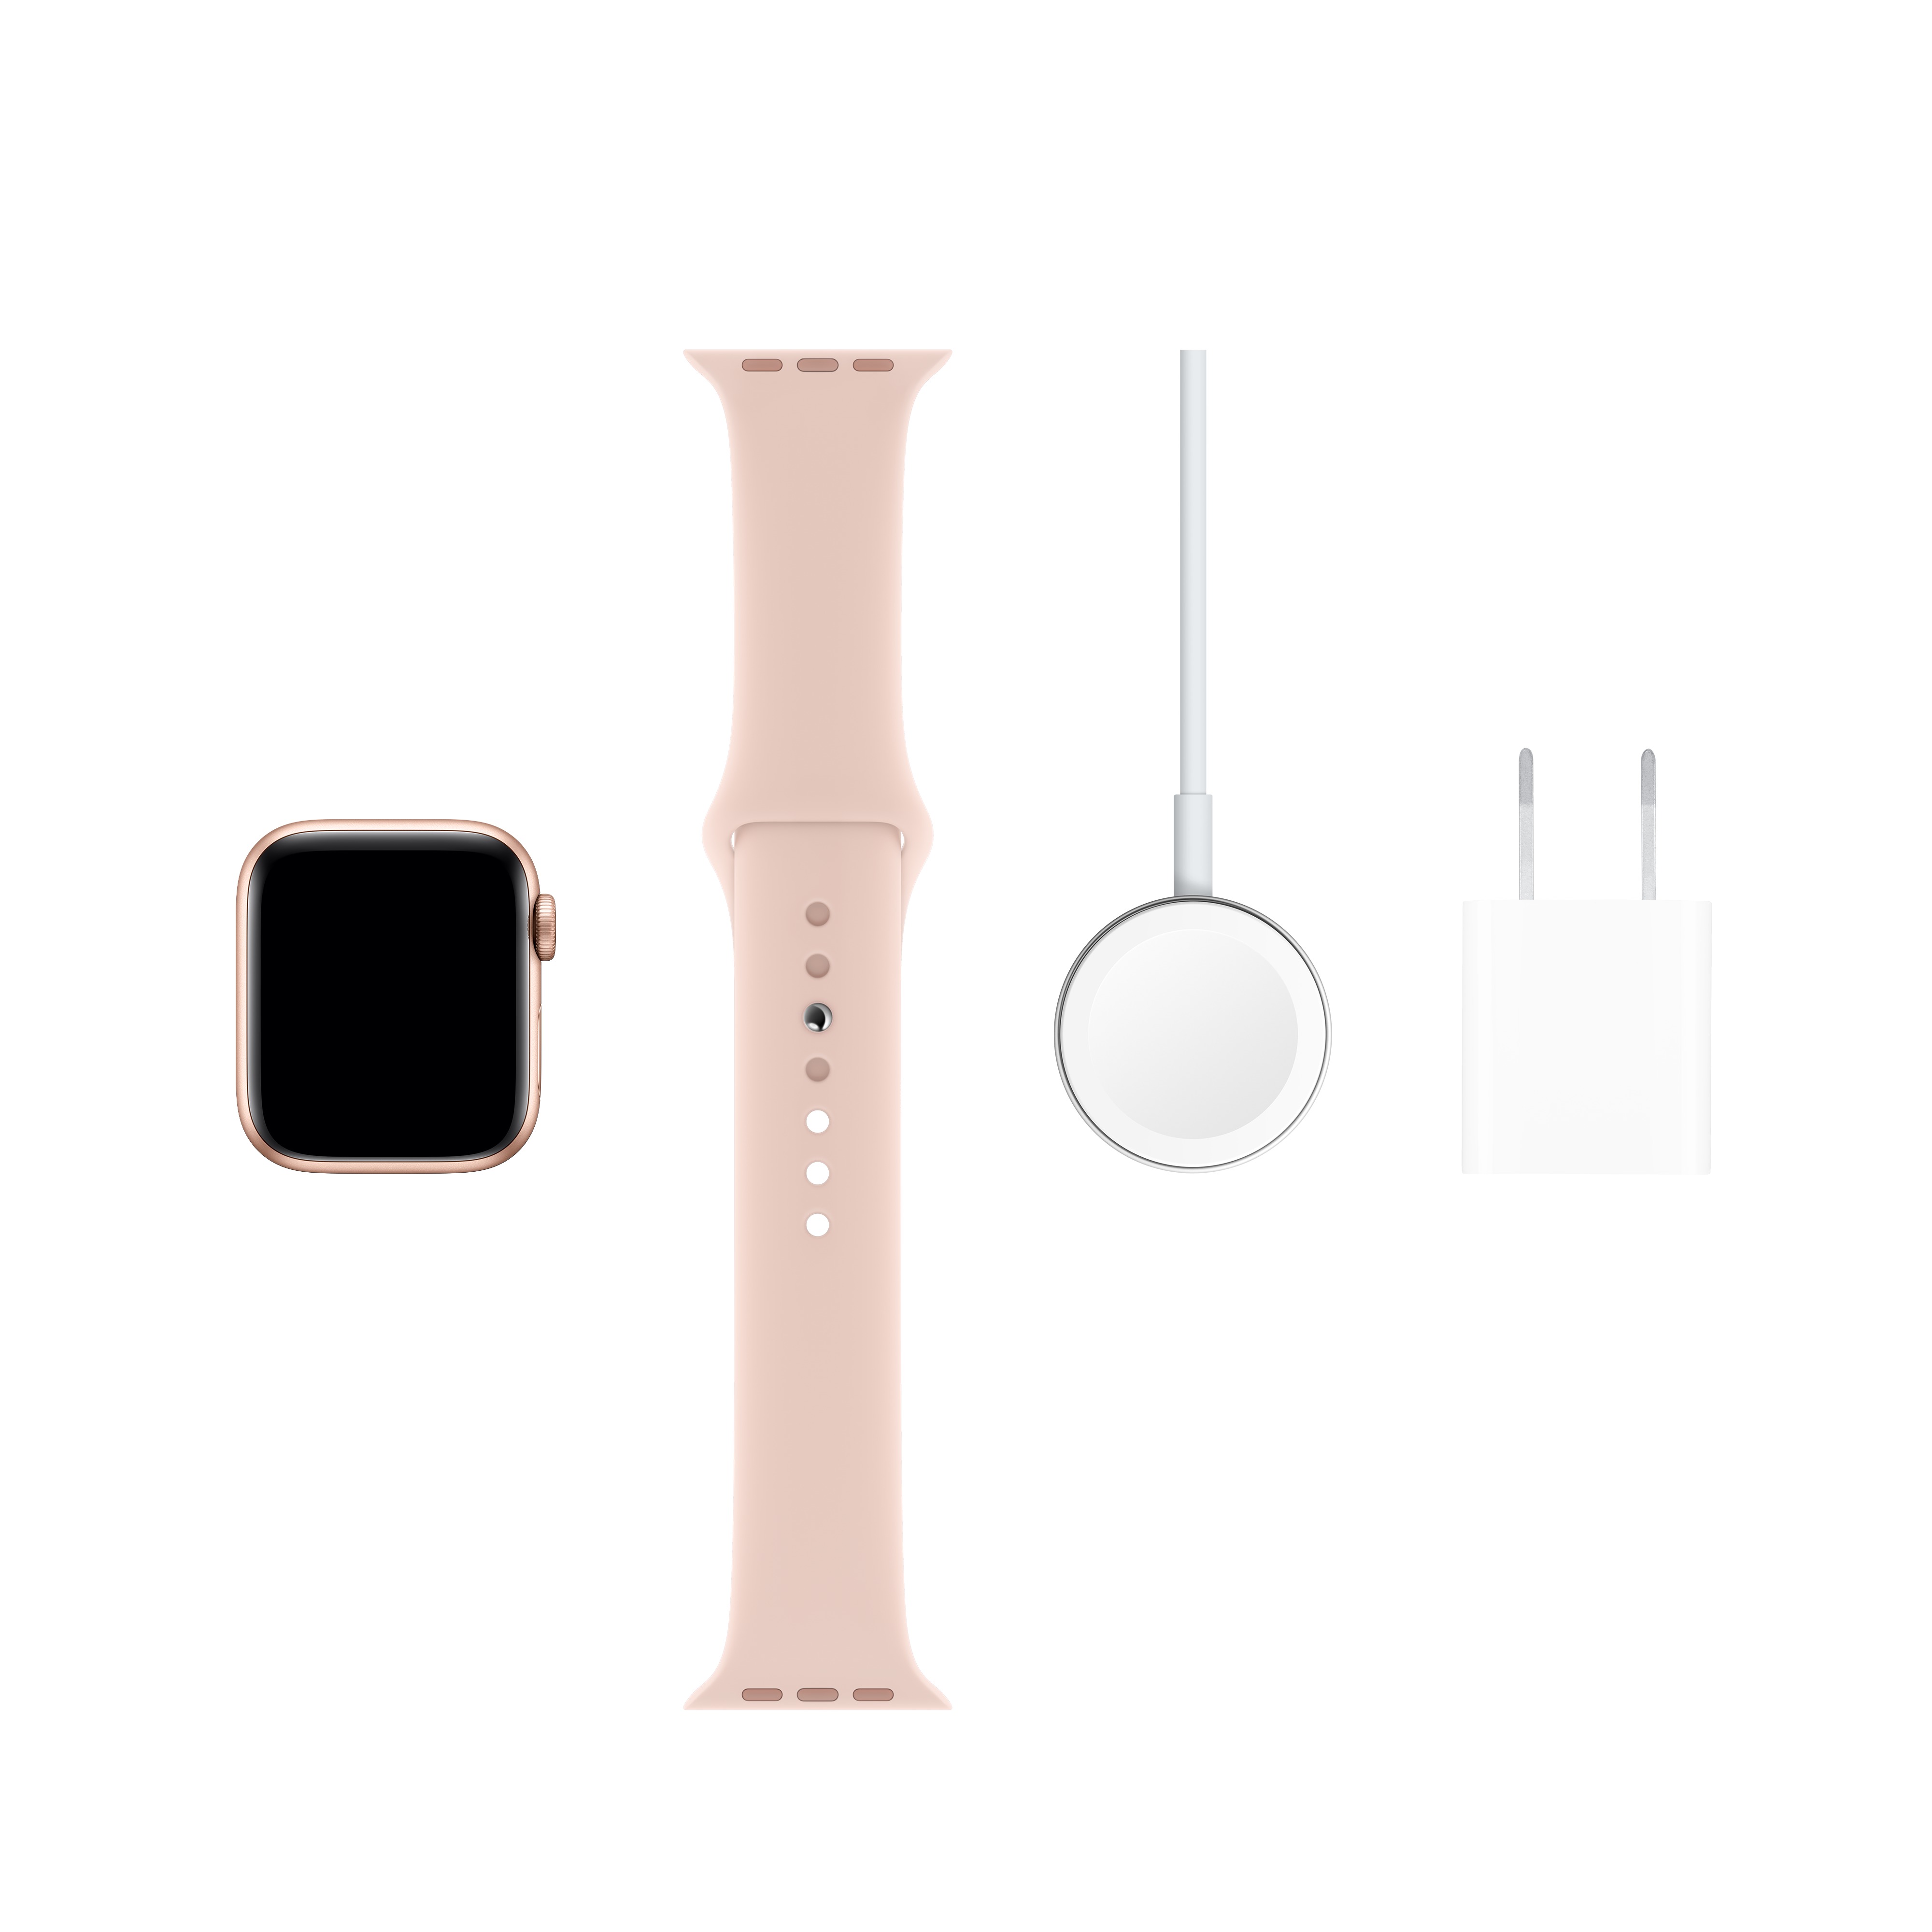 Apple Watch Series 5 GPS + Cellular, 40mm Gold Aluminum Case with Pink Sand Sport Band - S/M & M/L - image 3 of 6